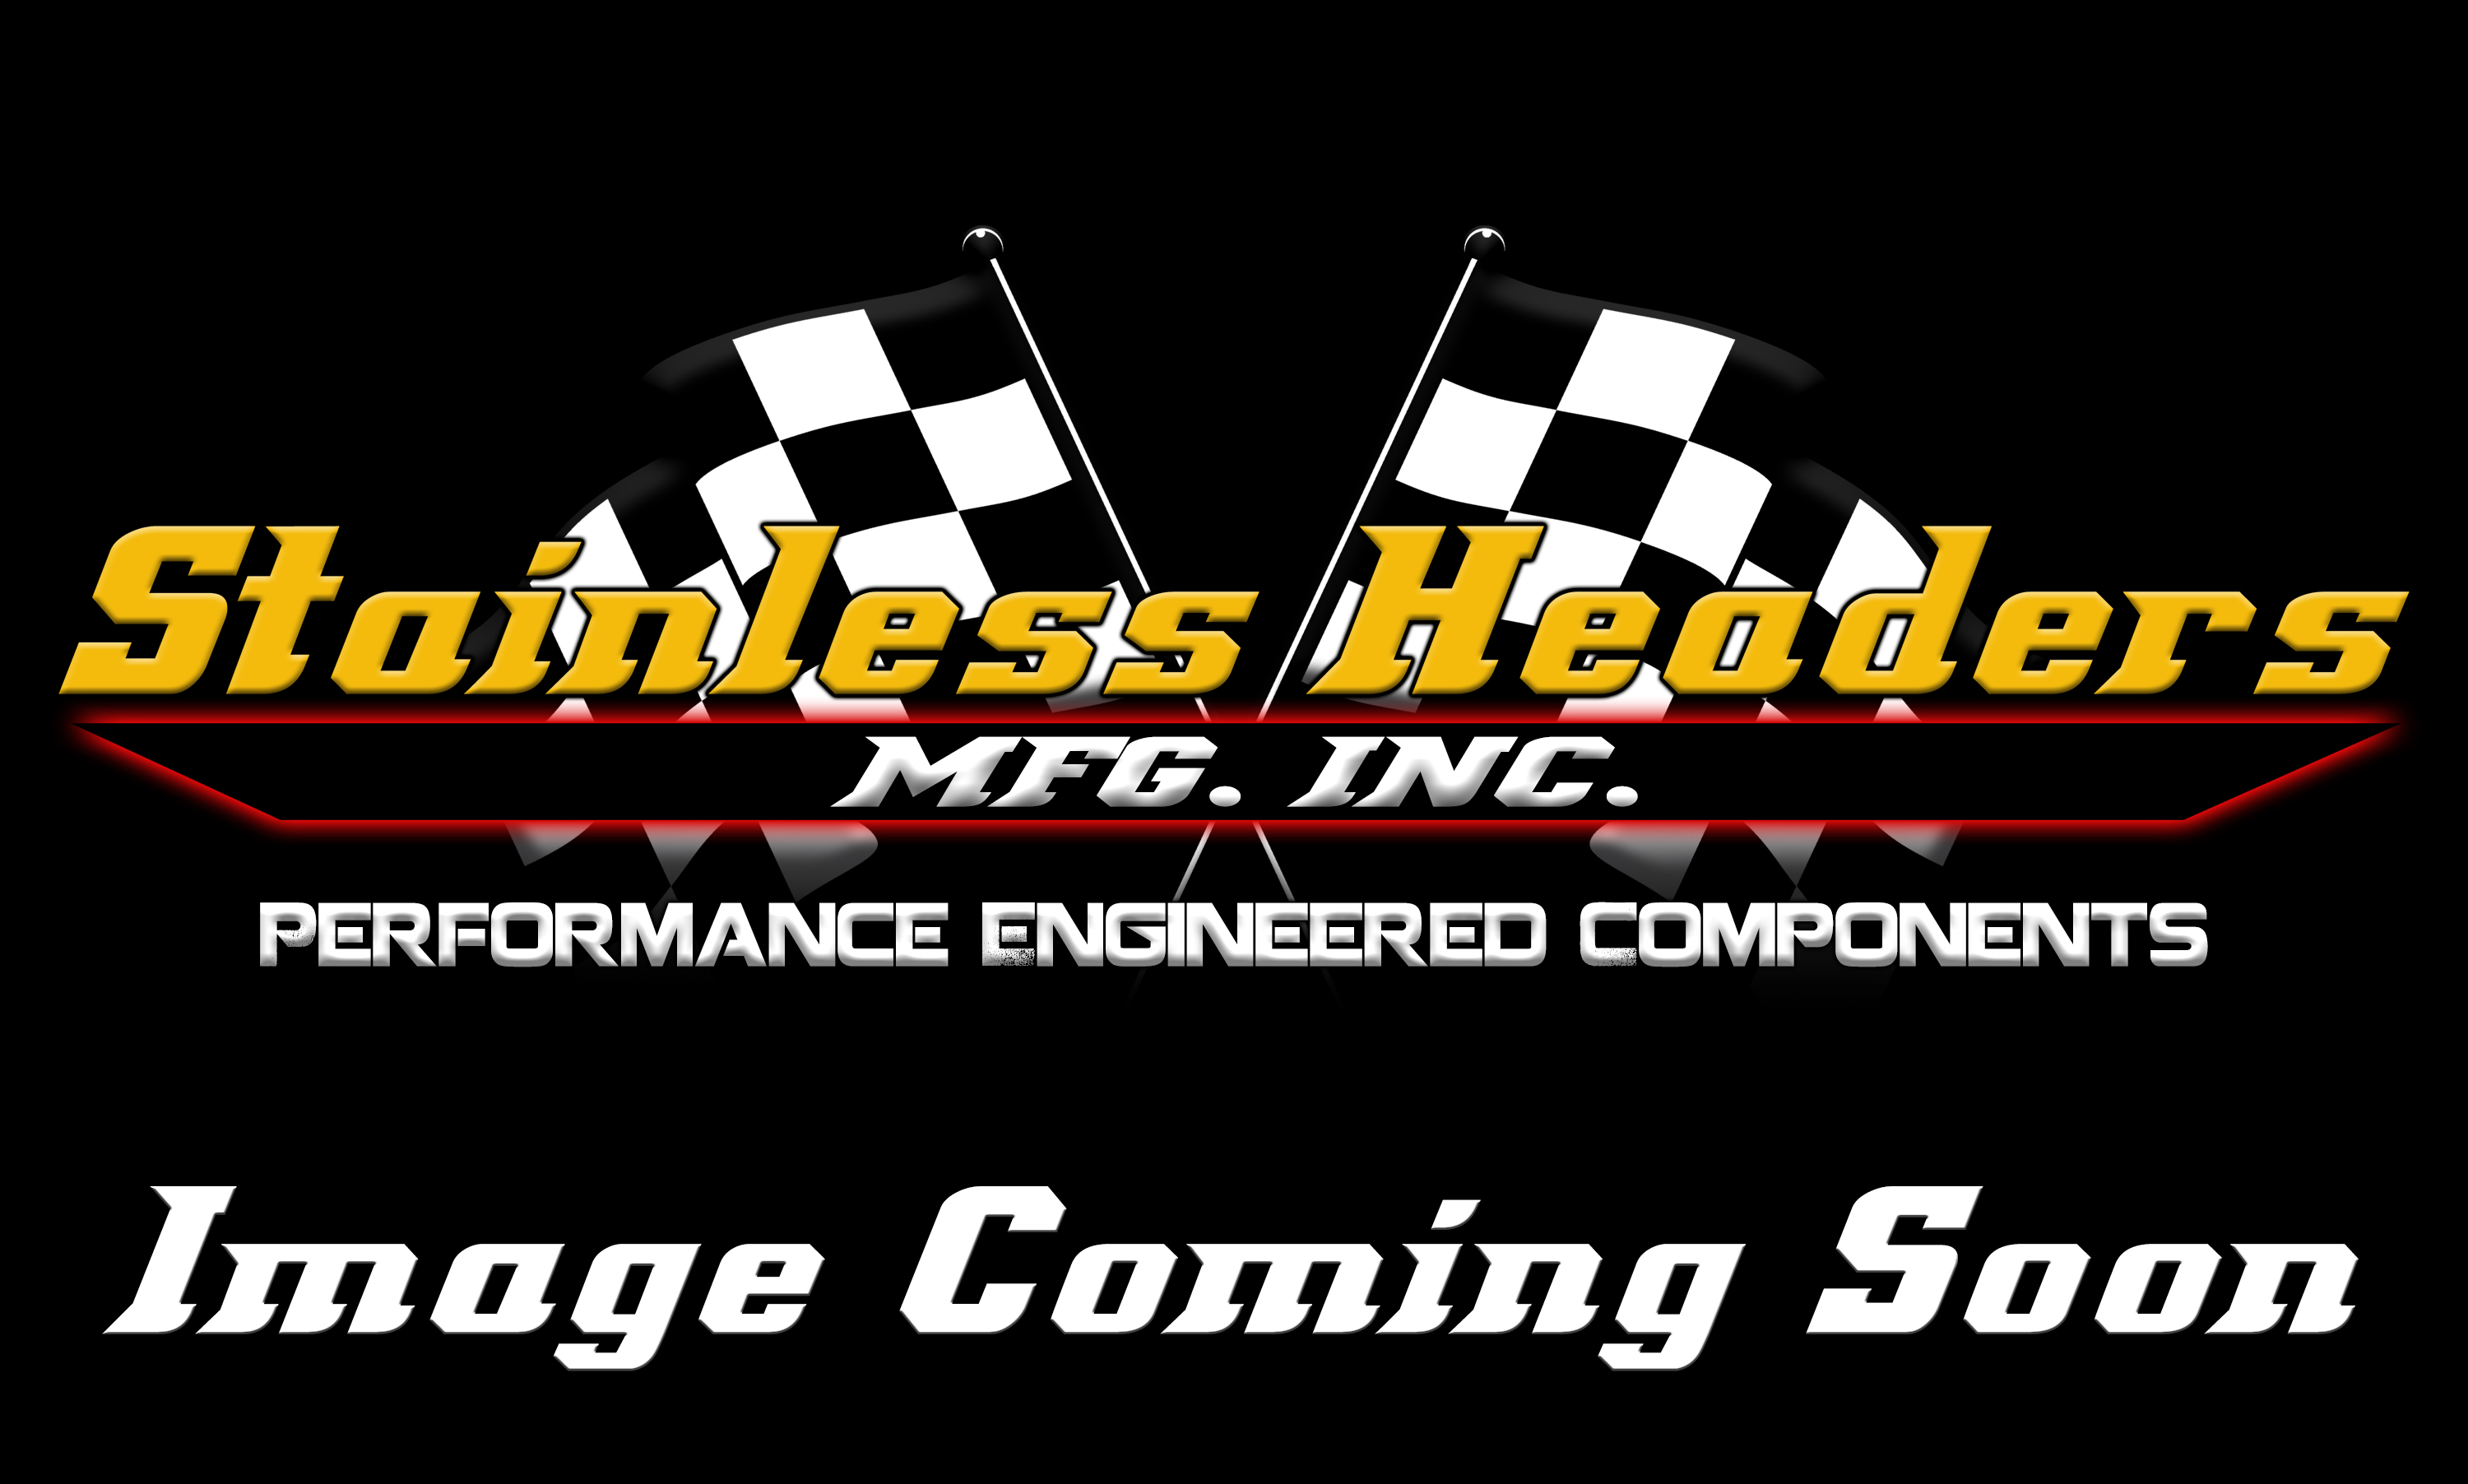 Stainless Headers - 1 5/8" Primary 6 into 1 Performance Merge Collector-16ga 321ss